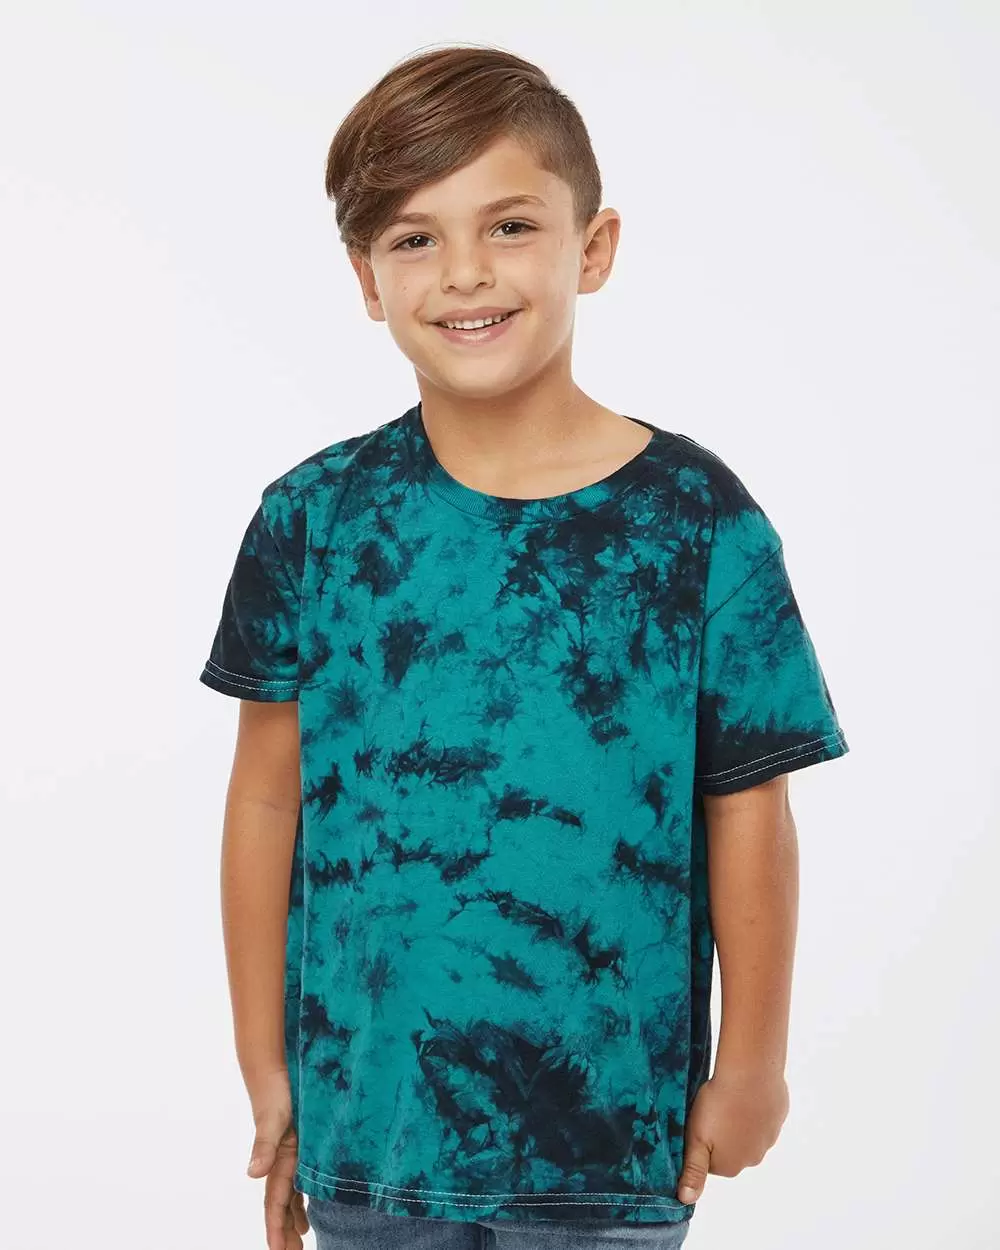 Dyenomite 20BCR Youth Crystal Tie Dye T-Shirt Black/ Teal - From $7.31